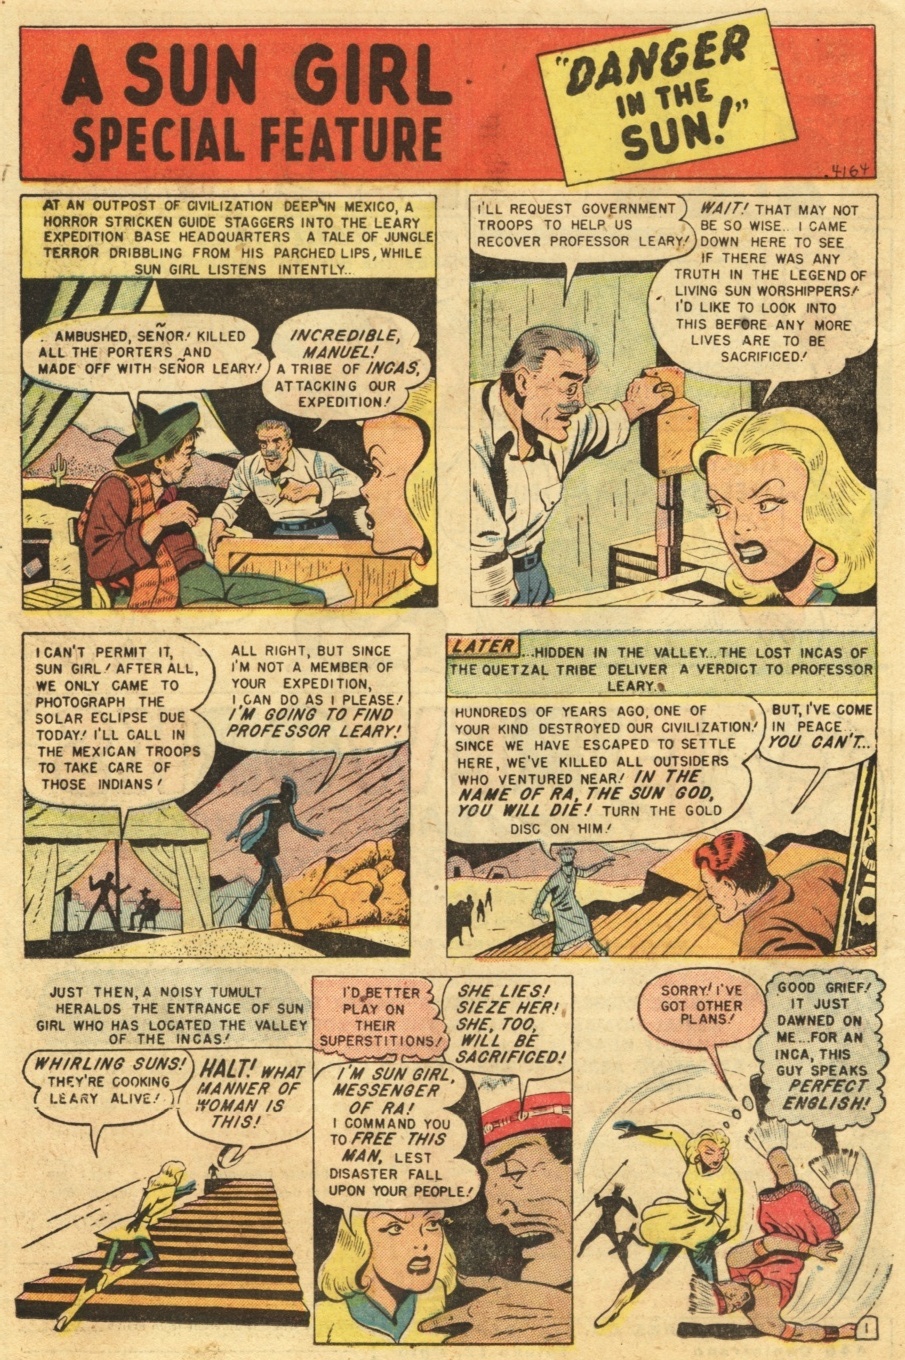 Marvel Tales (1949) 97 Page 21